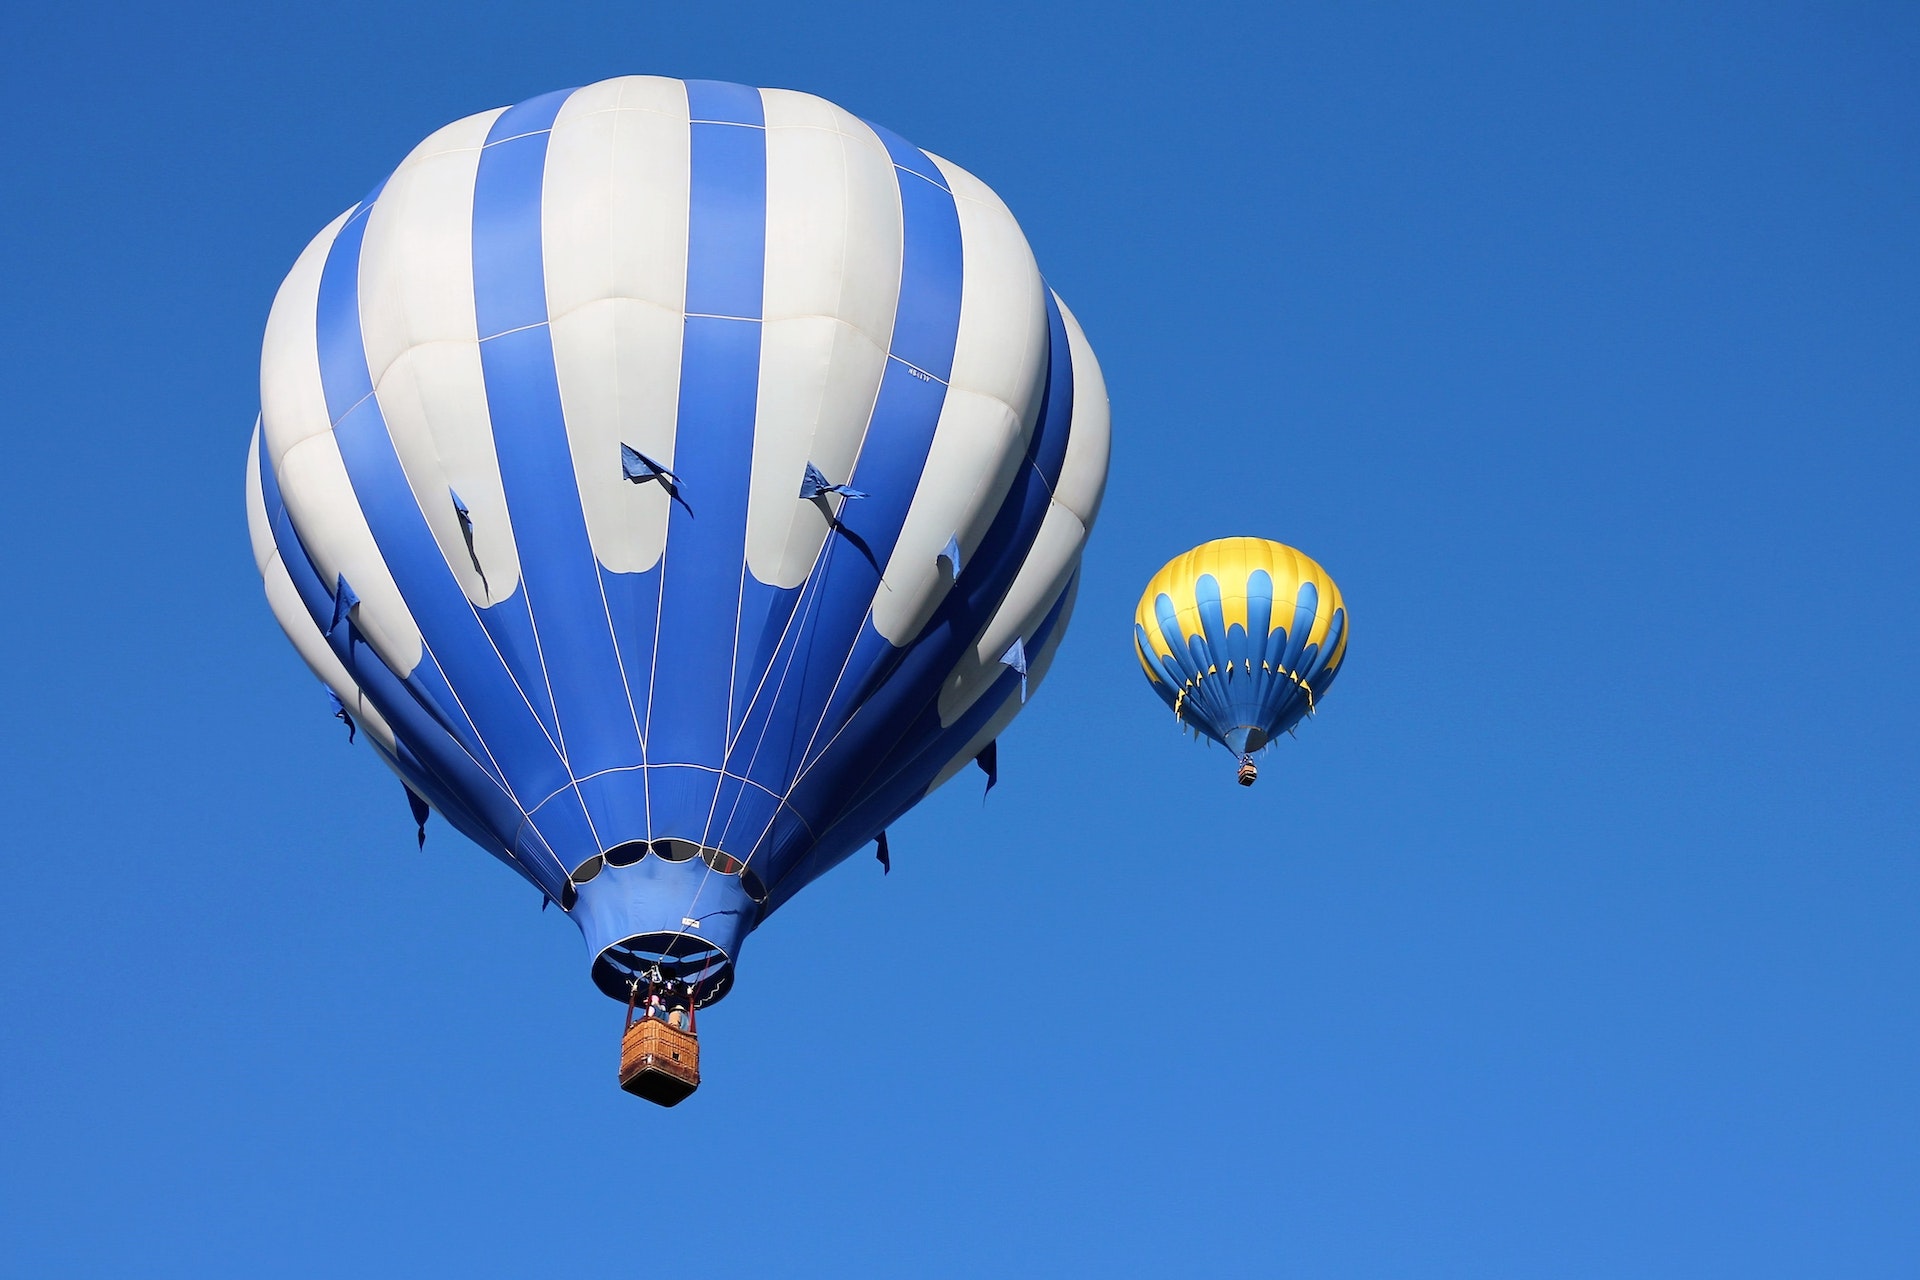 Hot Air Balloon Rides Over Napa Valley - Soar Above The Vineyards